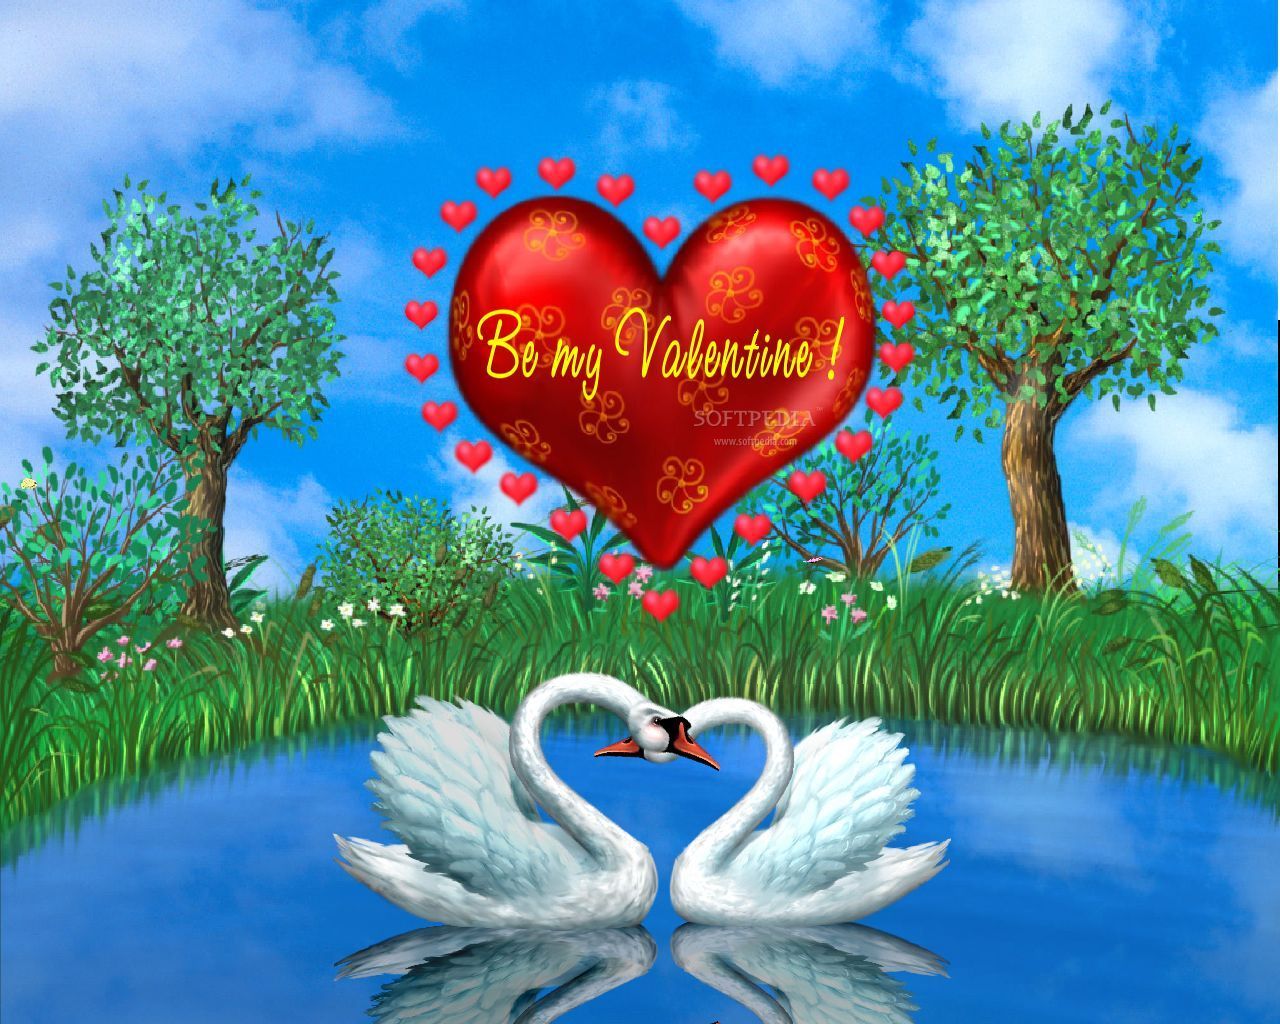 Animated Love Desktop Wallpaper, Animated Love Images, New Backgrounds